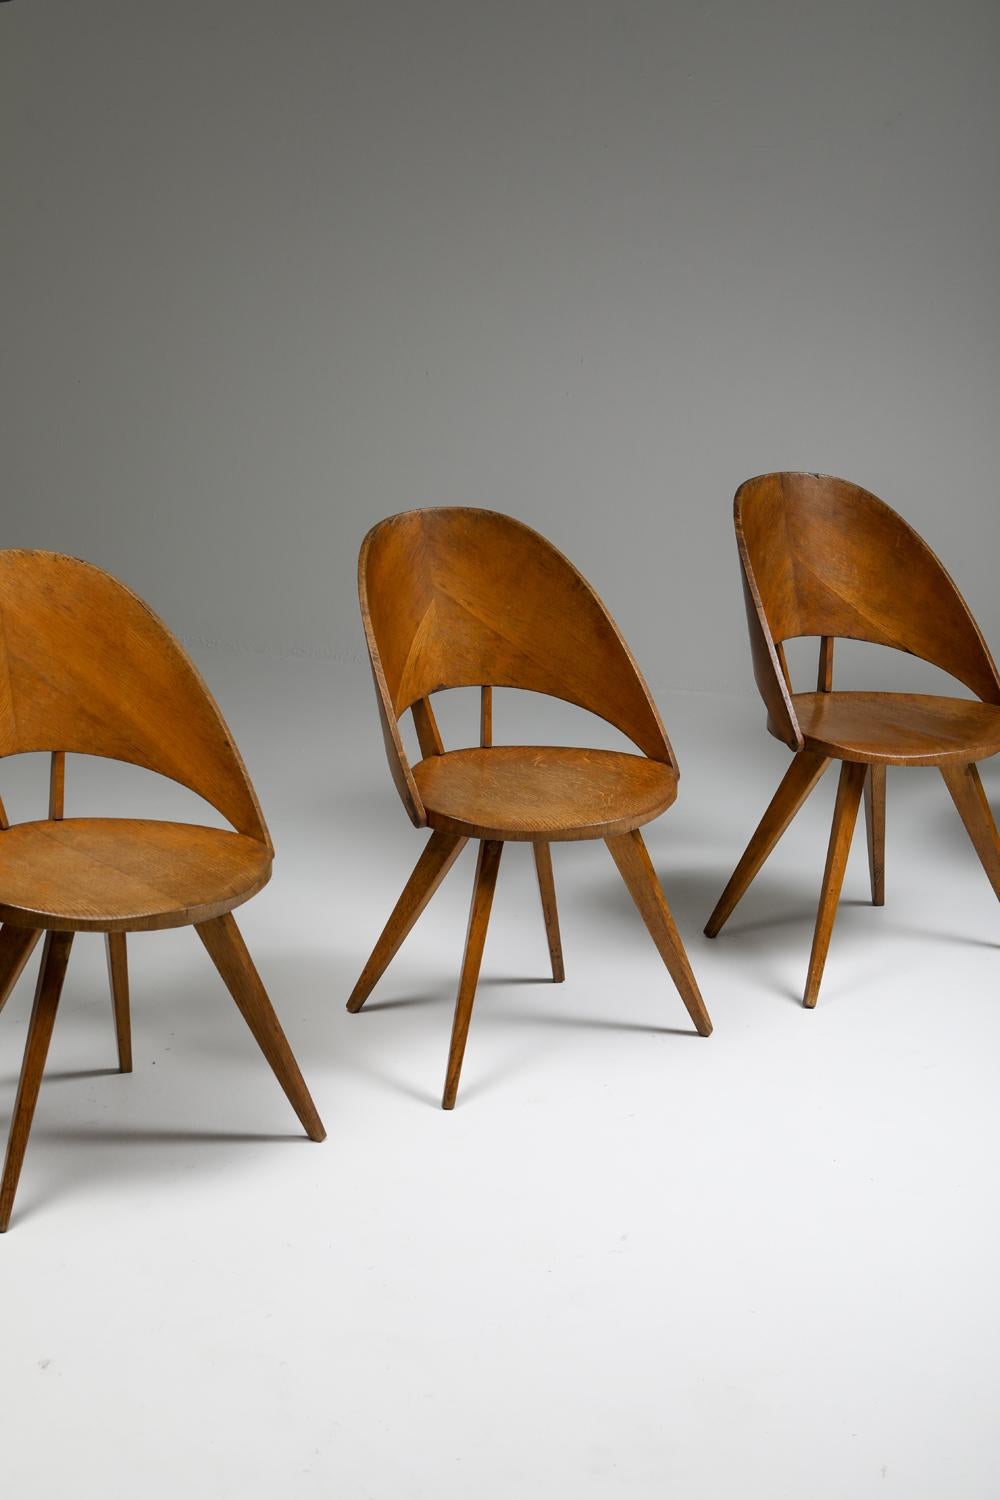 Italian Plywood Dining Chairs, 1940s For Sale 7